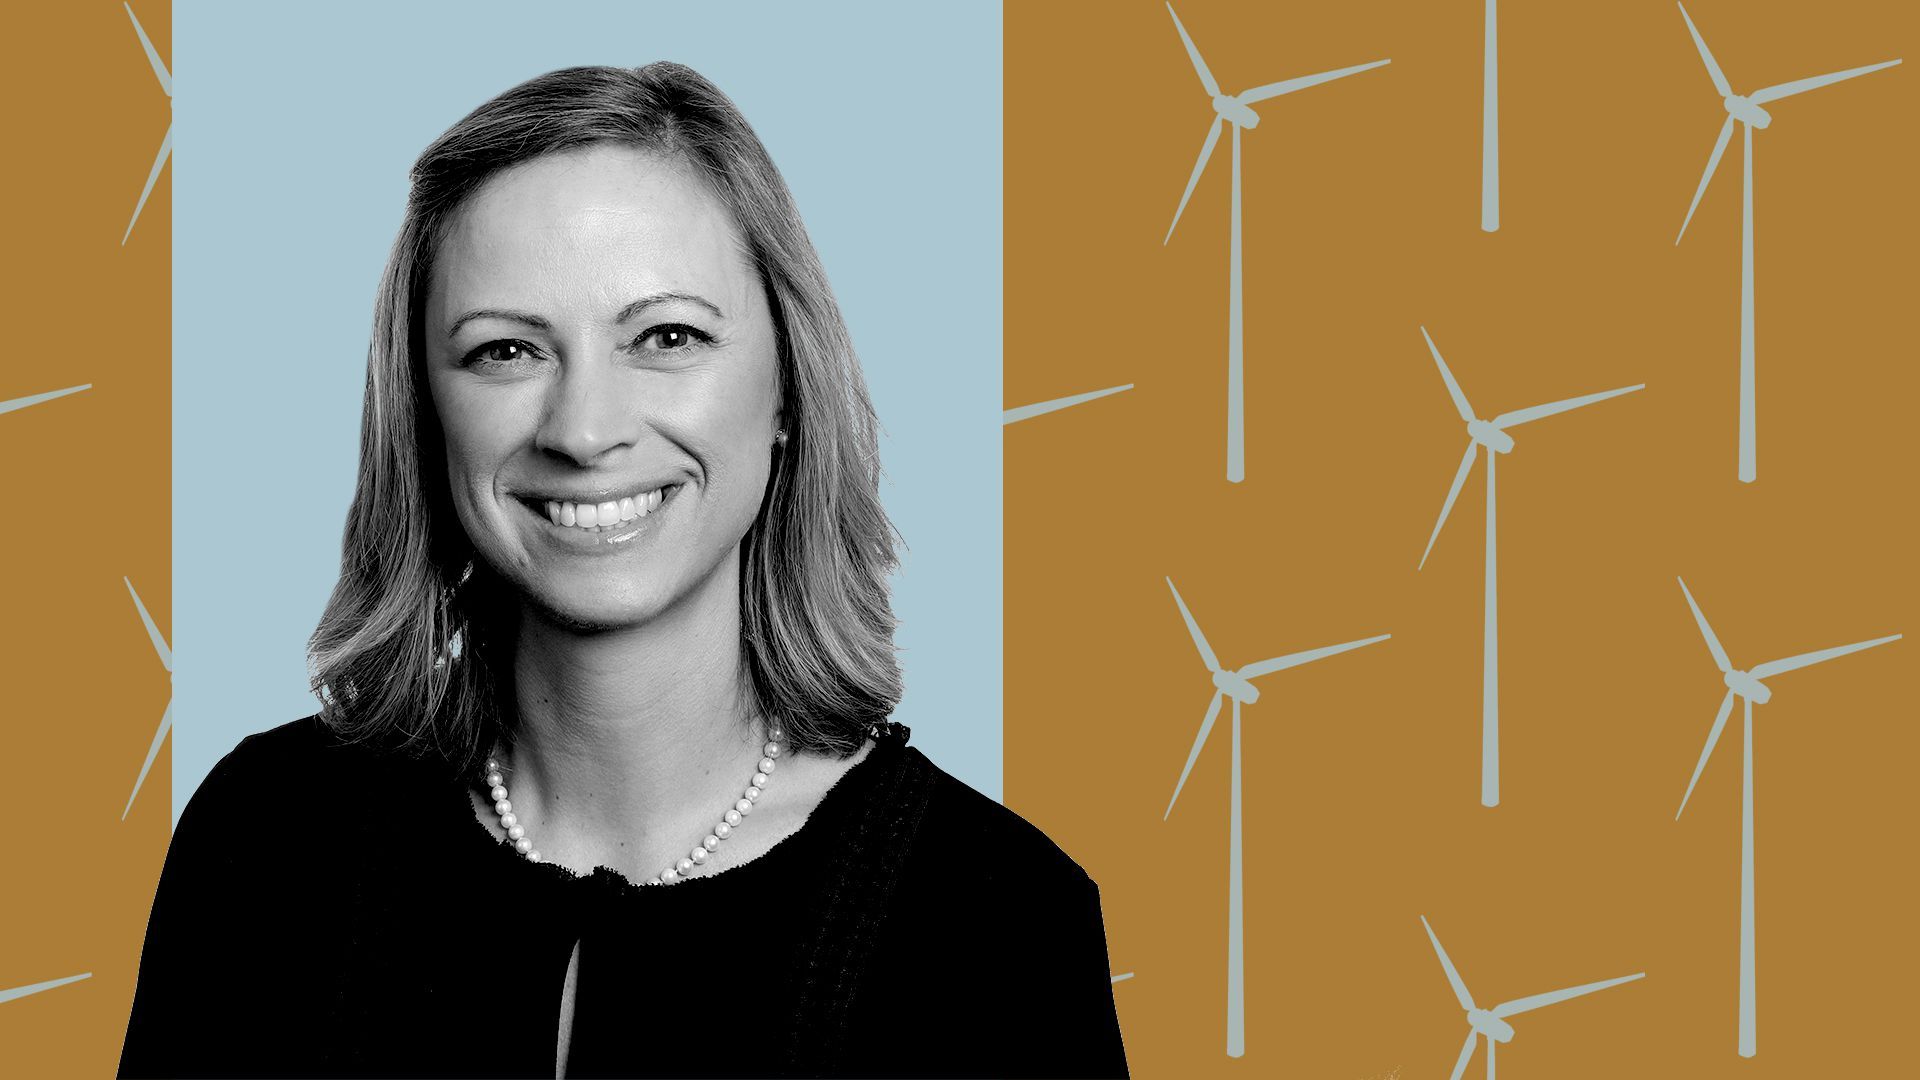 Photo illustration of Molly Morris in front of wind turbine silhouettes arranged in a pattern